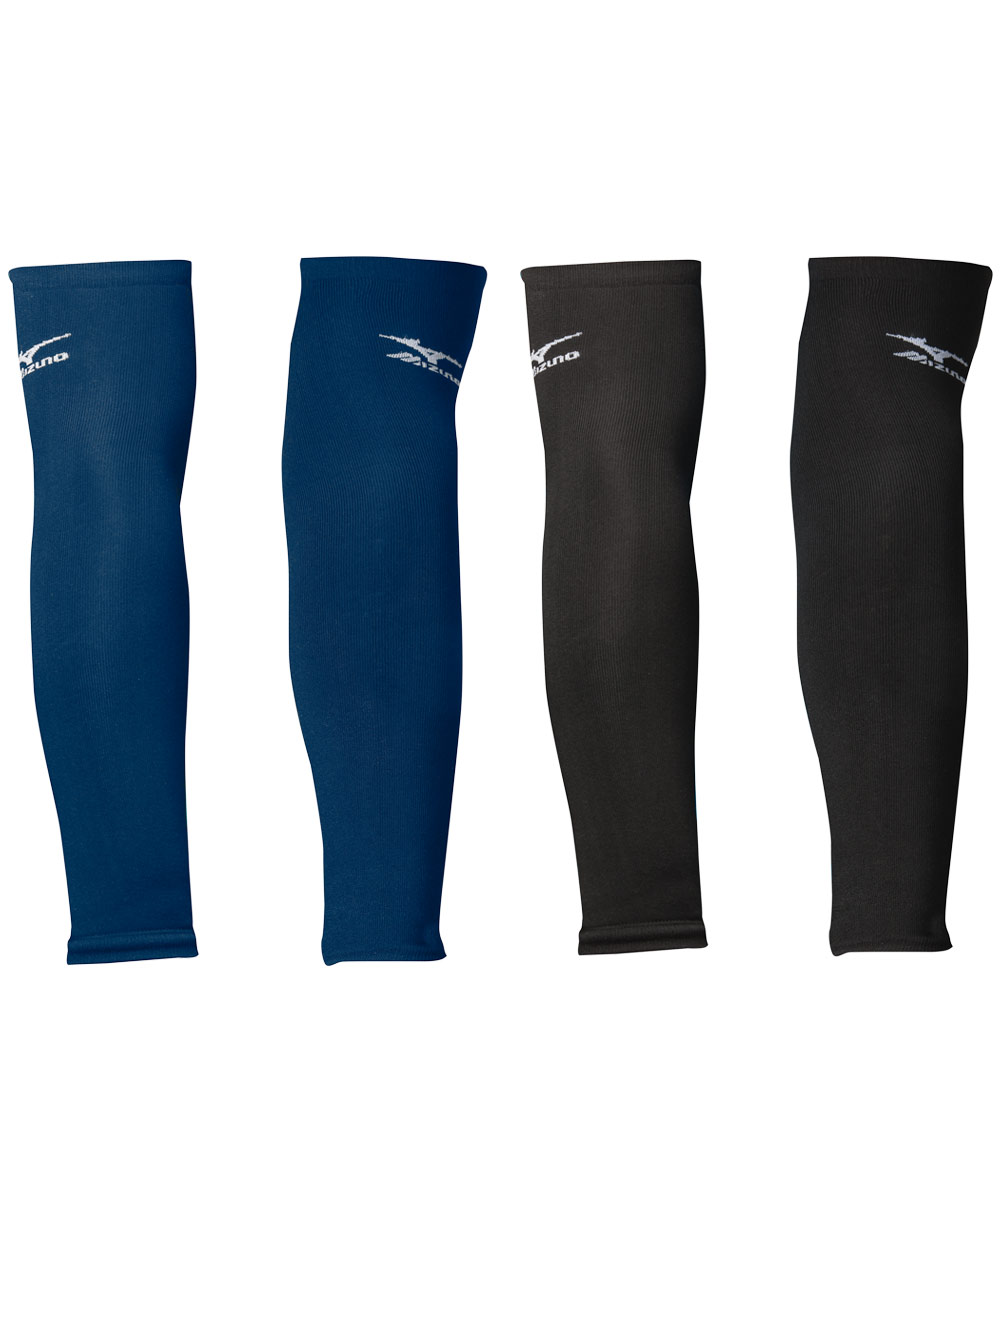 Mizuno Arm Sleeves | Midwest Volleyball 